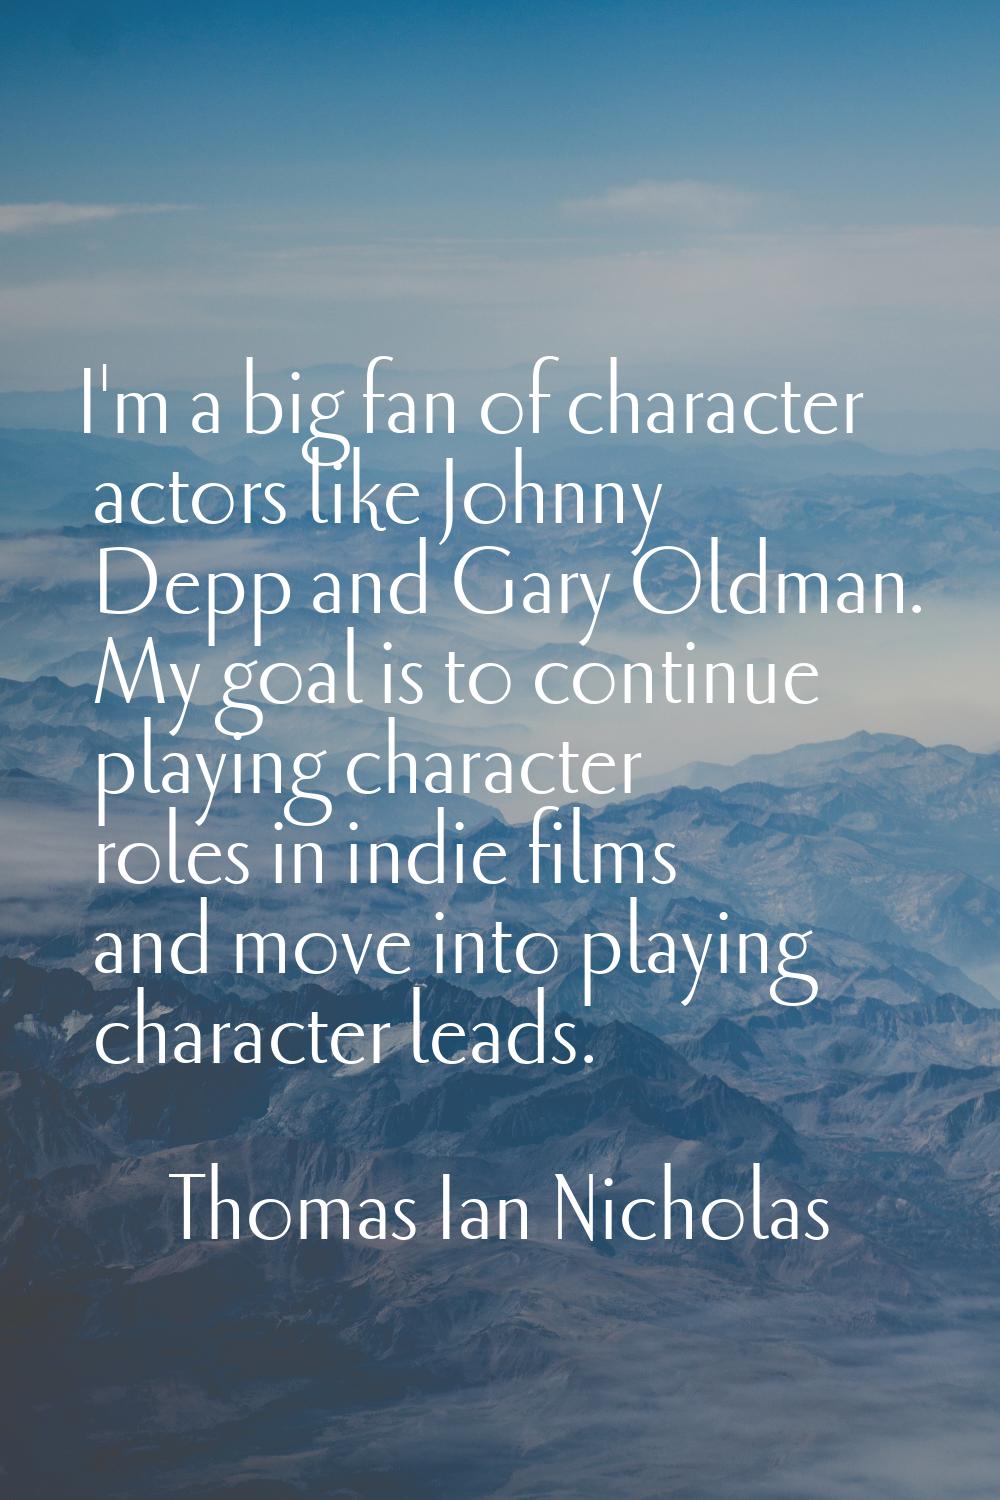 I'm a big fan of character actors like Johnny Depp and Gary Oldman. My goal is to continue playing 